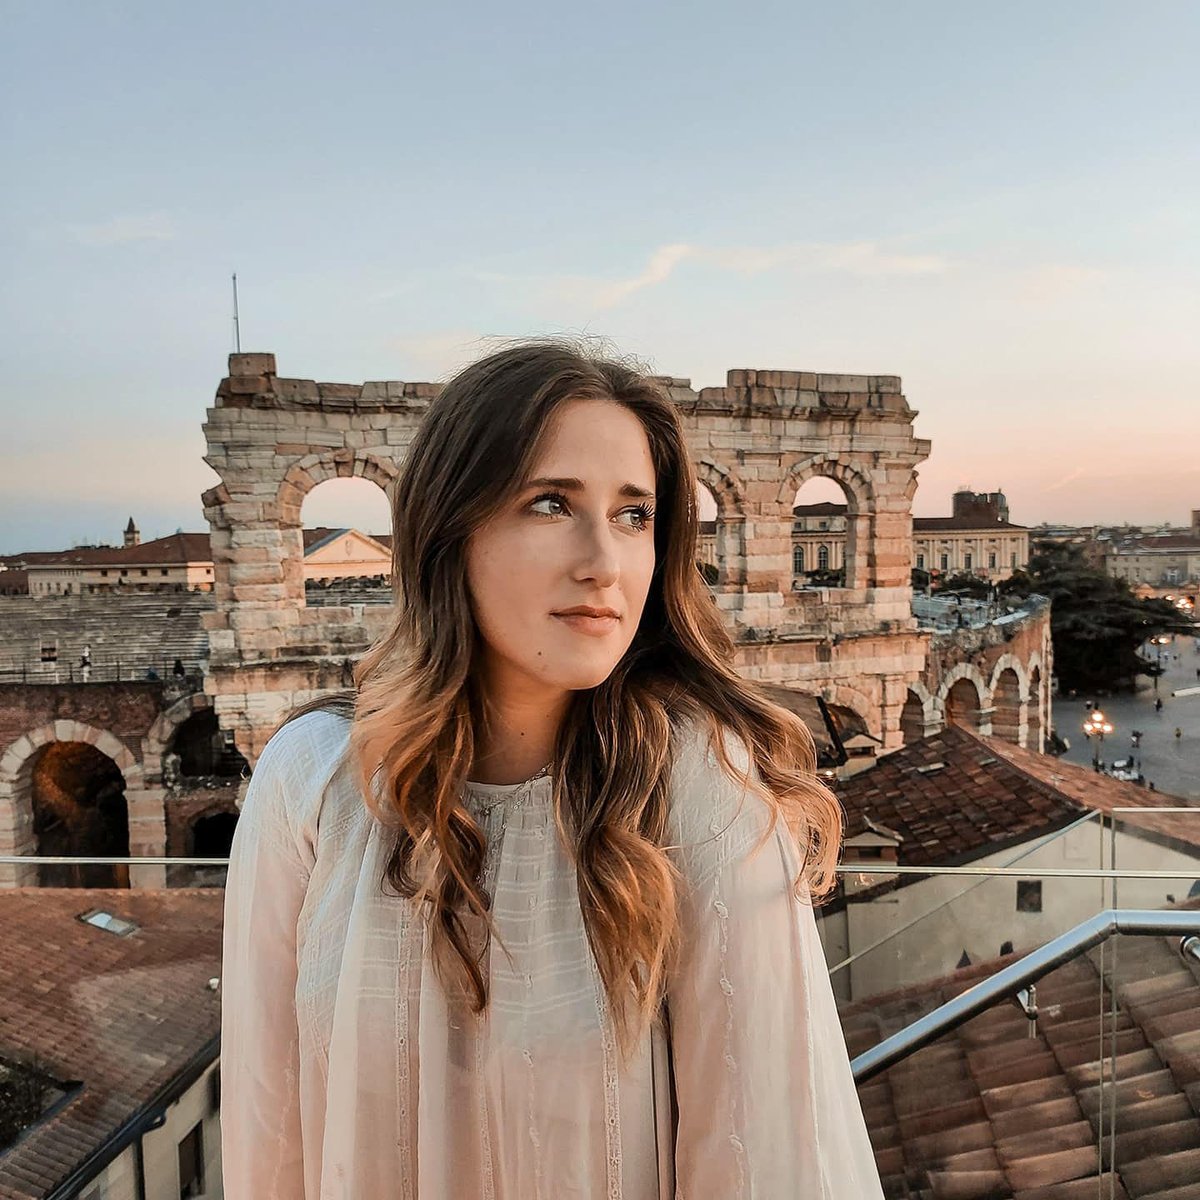 It's hashtag #Timetowine with @JessycaLewis and @TulliaMantella February 2nd, 2024 She is a MA graduate in Comparative Literature & Cultures from the University of Verona. She works as an International PR Account Manager at StudioCru, a agency focused on wine & food promotion.